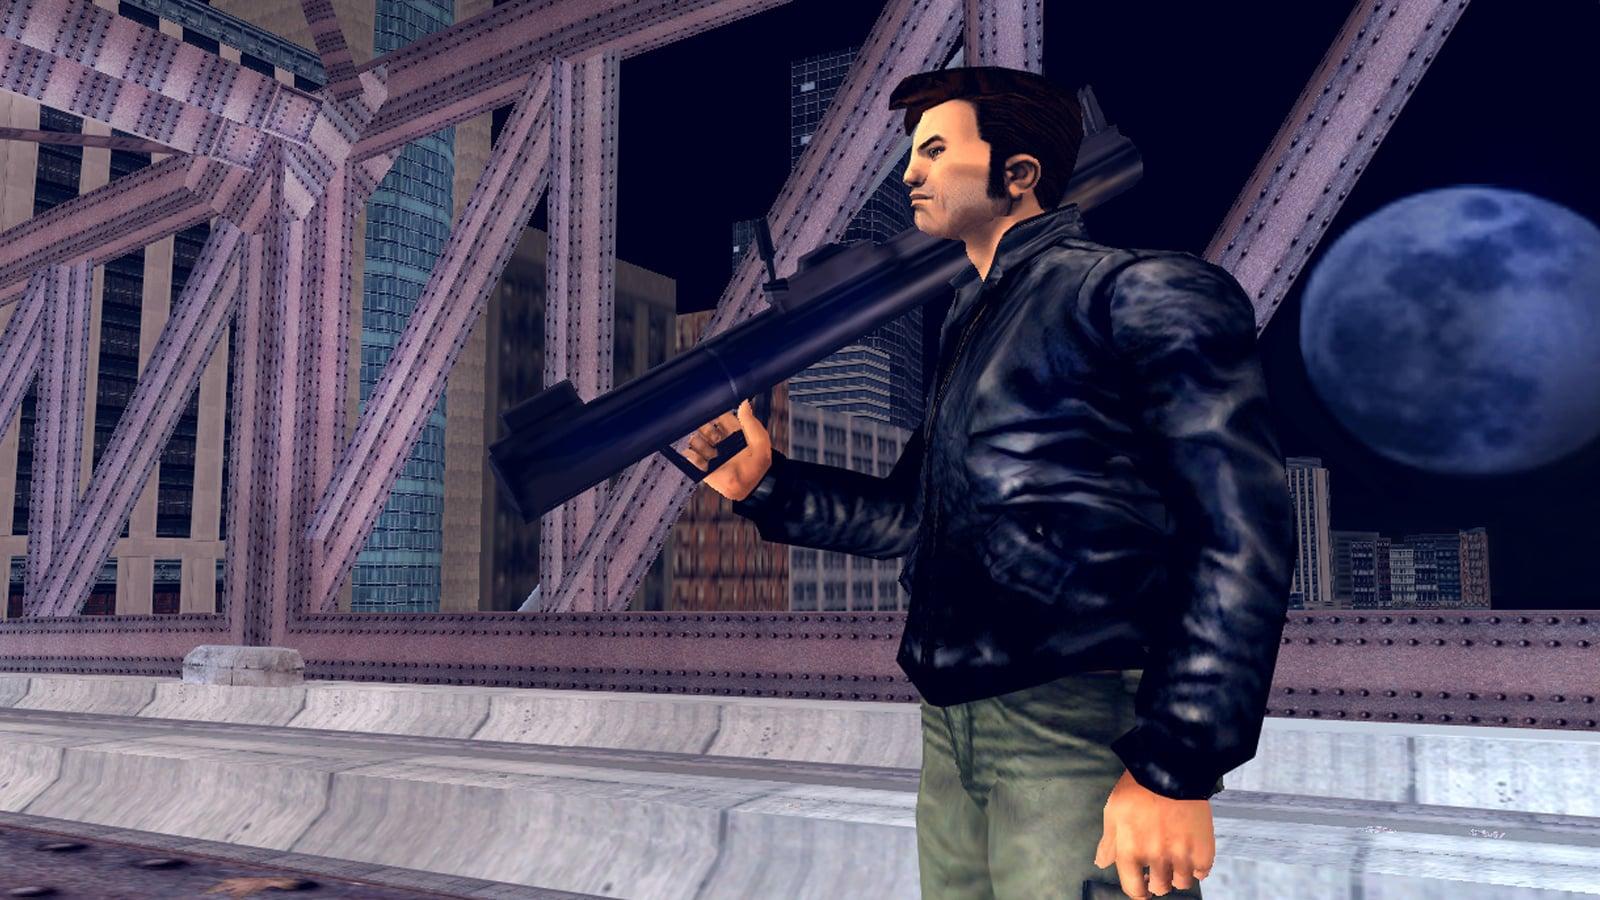 GTA 3 cheat codes: all weapons, money, cars, and more